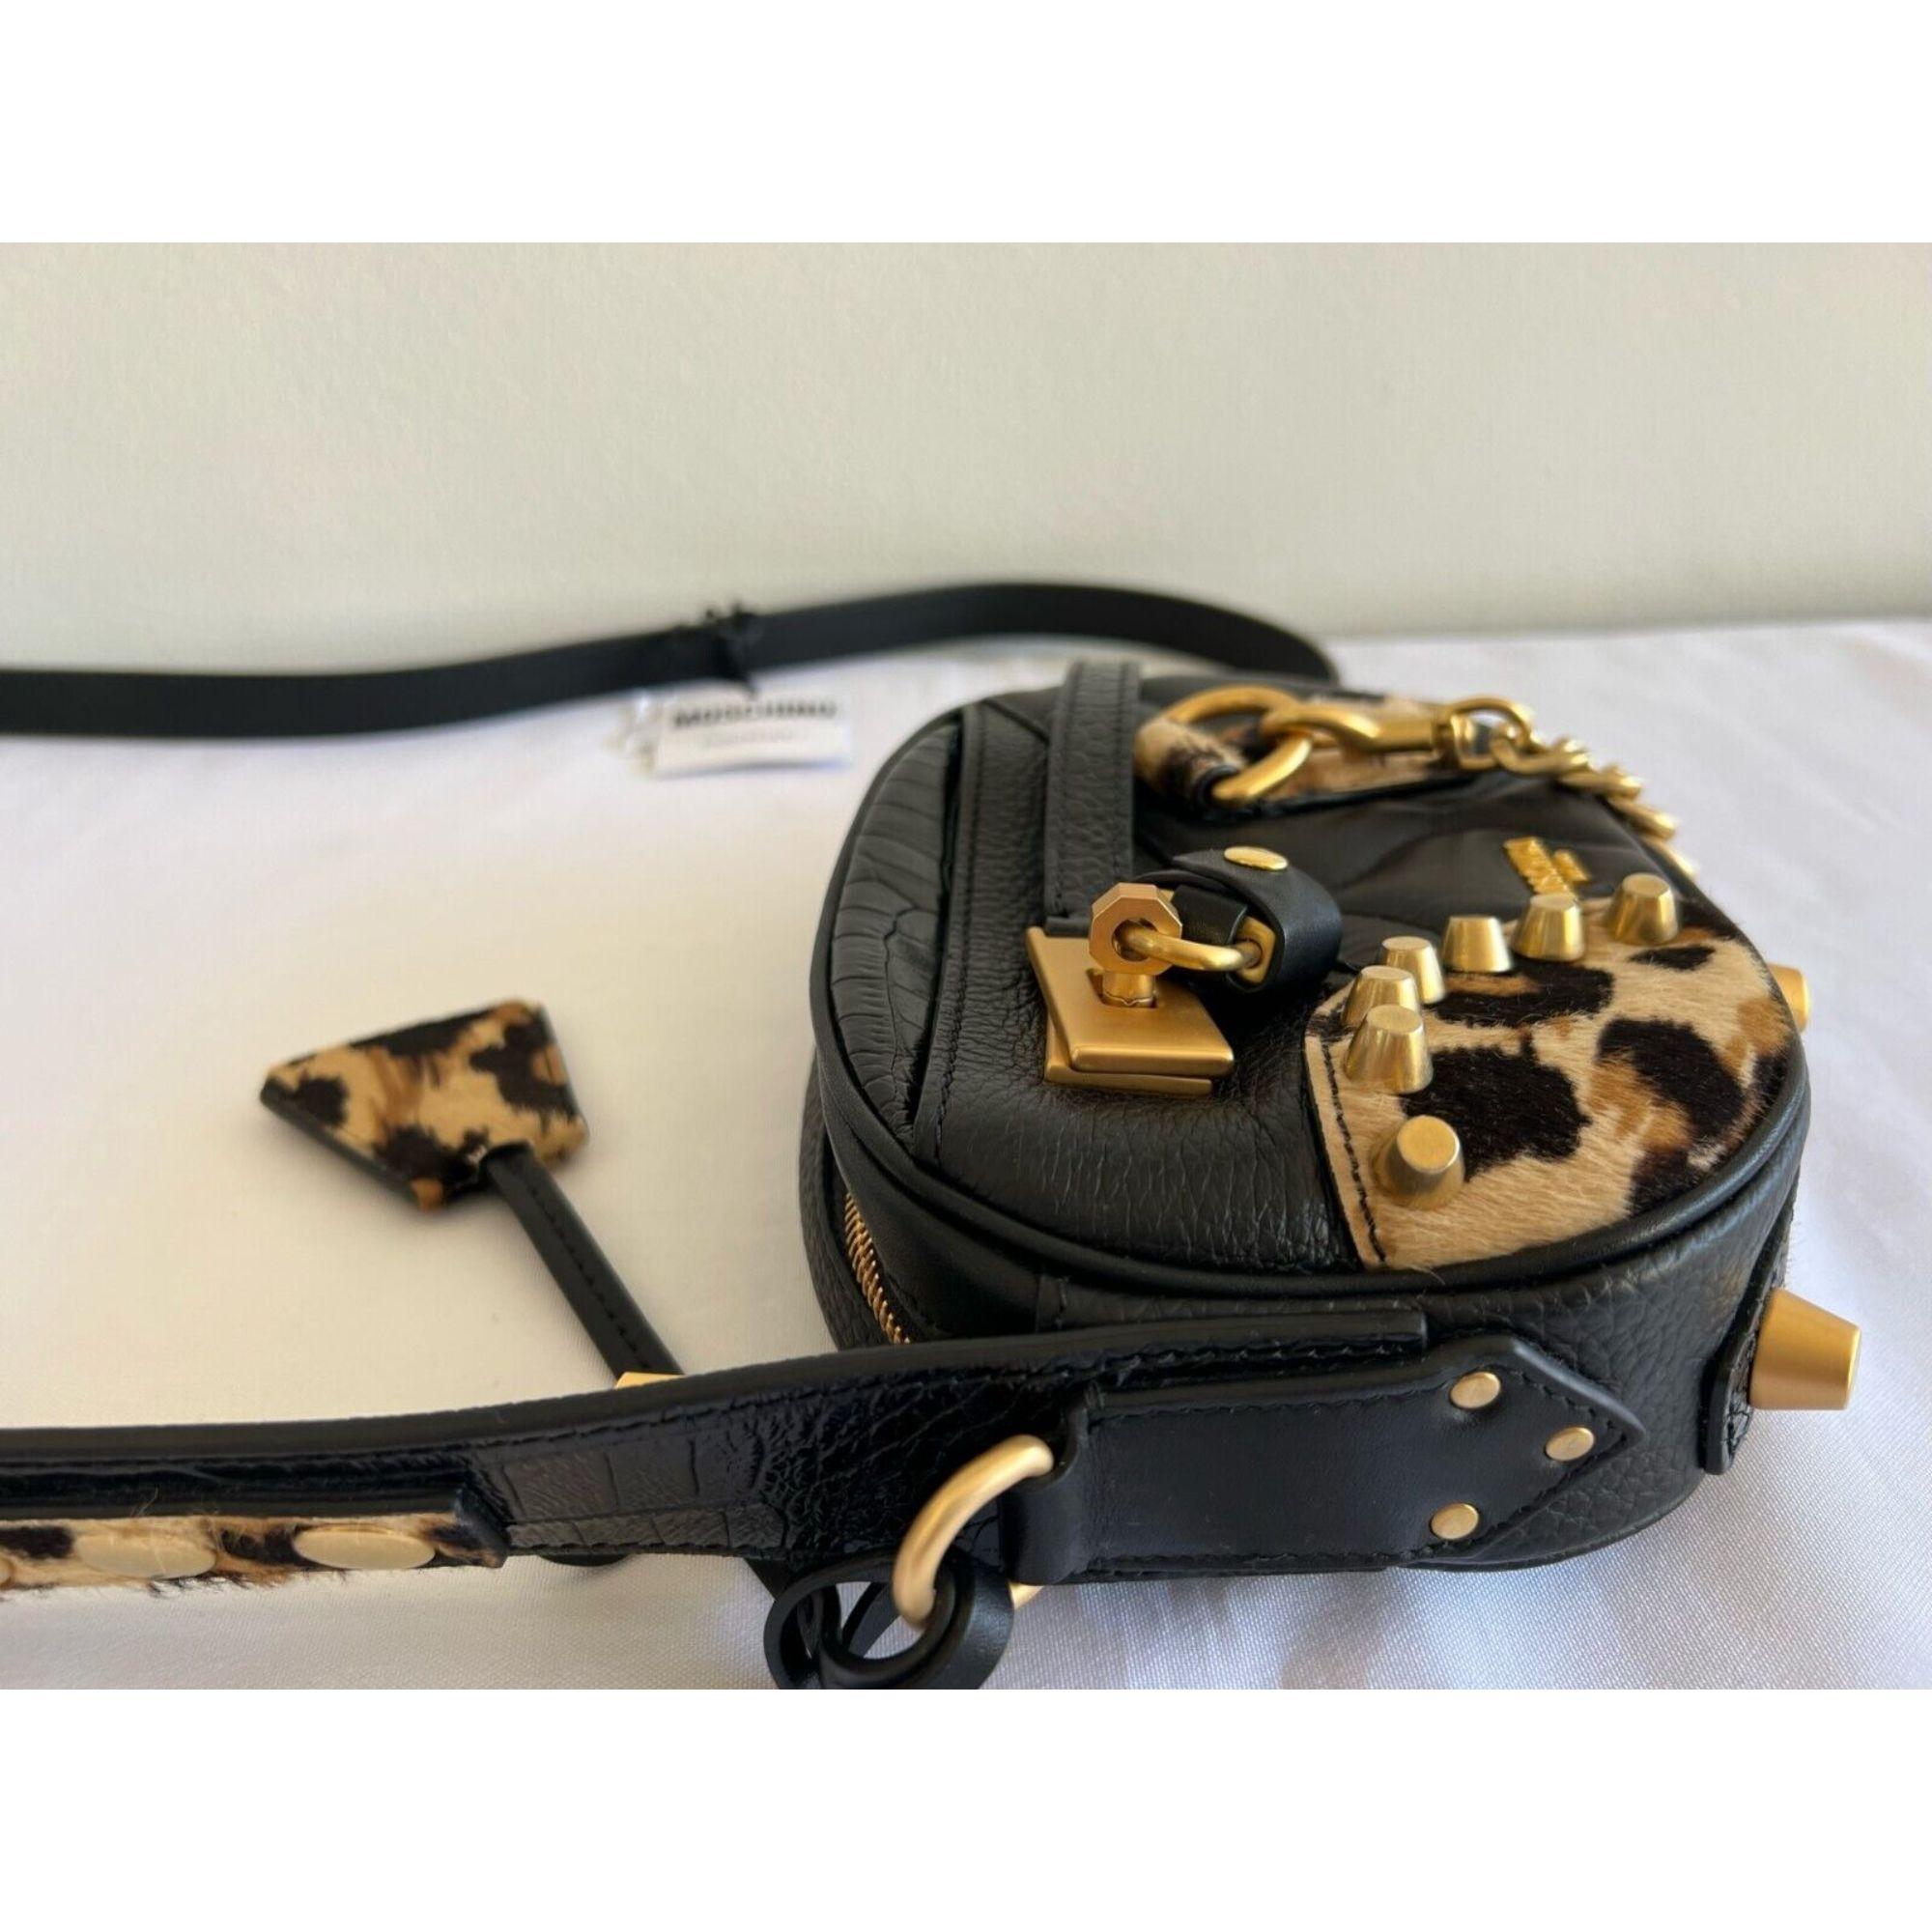 AW21 Moschino Couture Gold Leopard Black Leather Shoulder Bag by Jeremy Scott For Sale 1